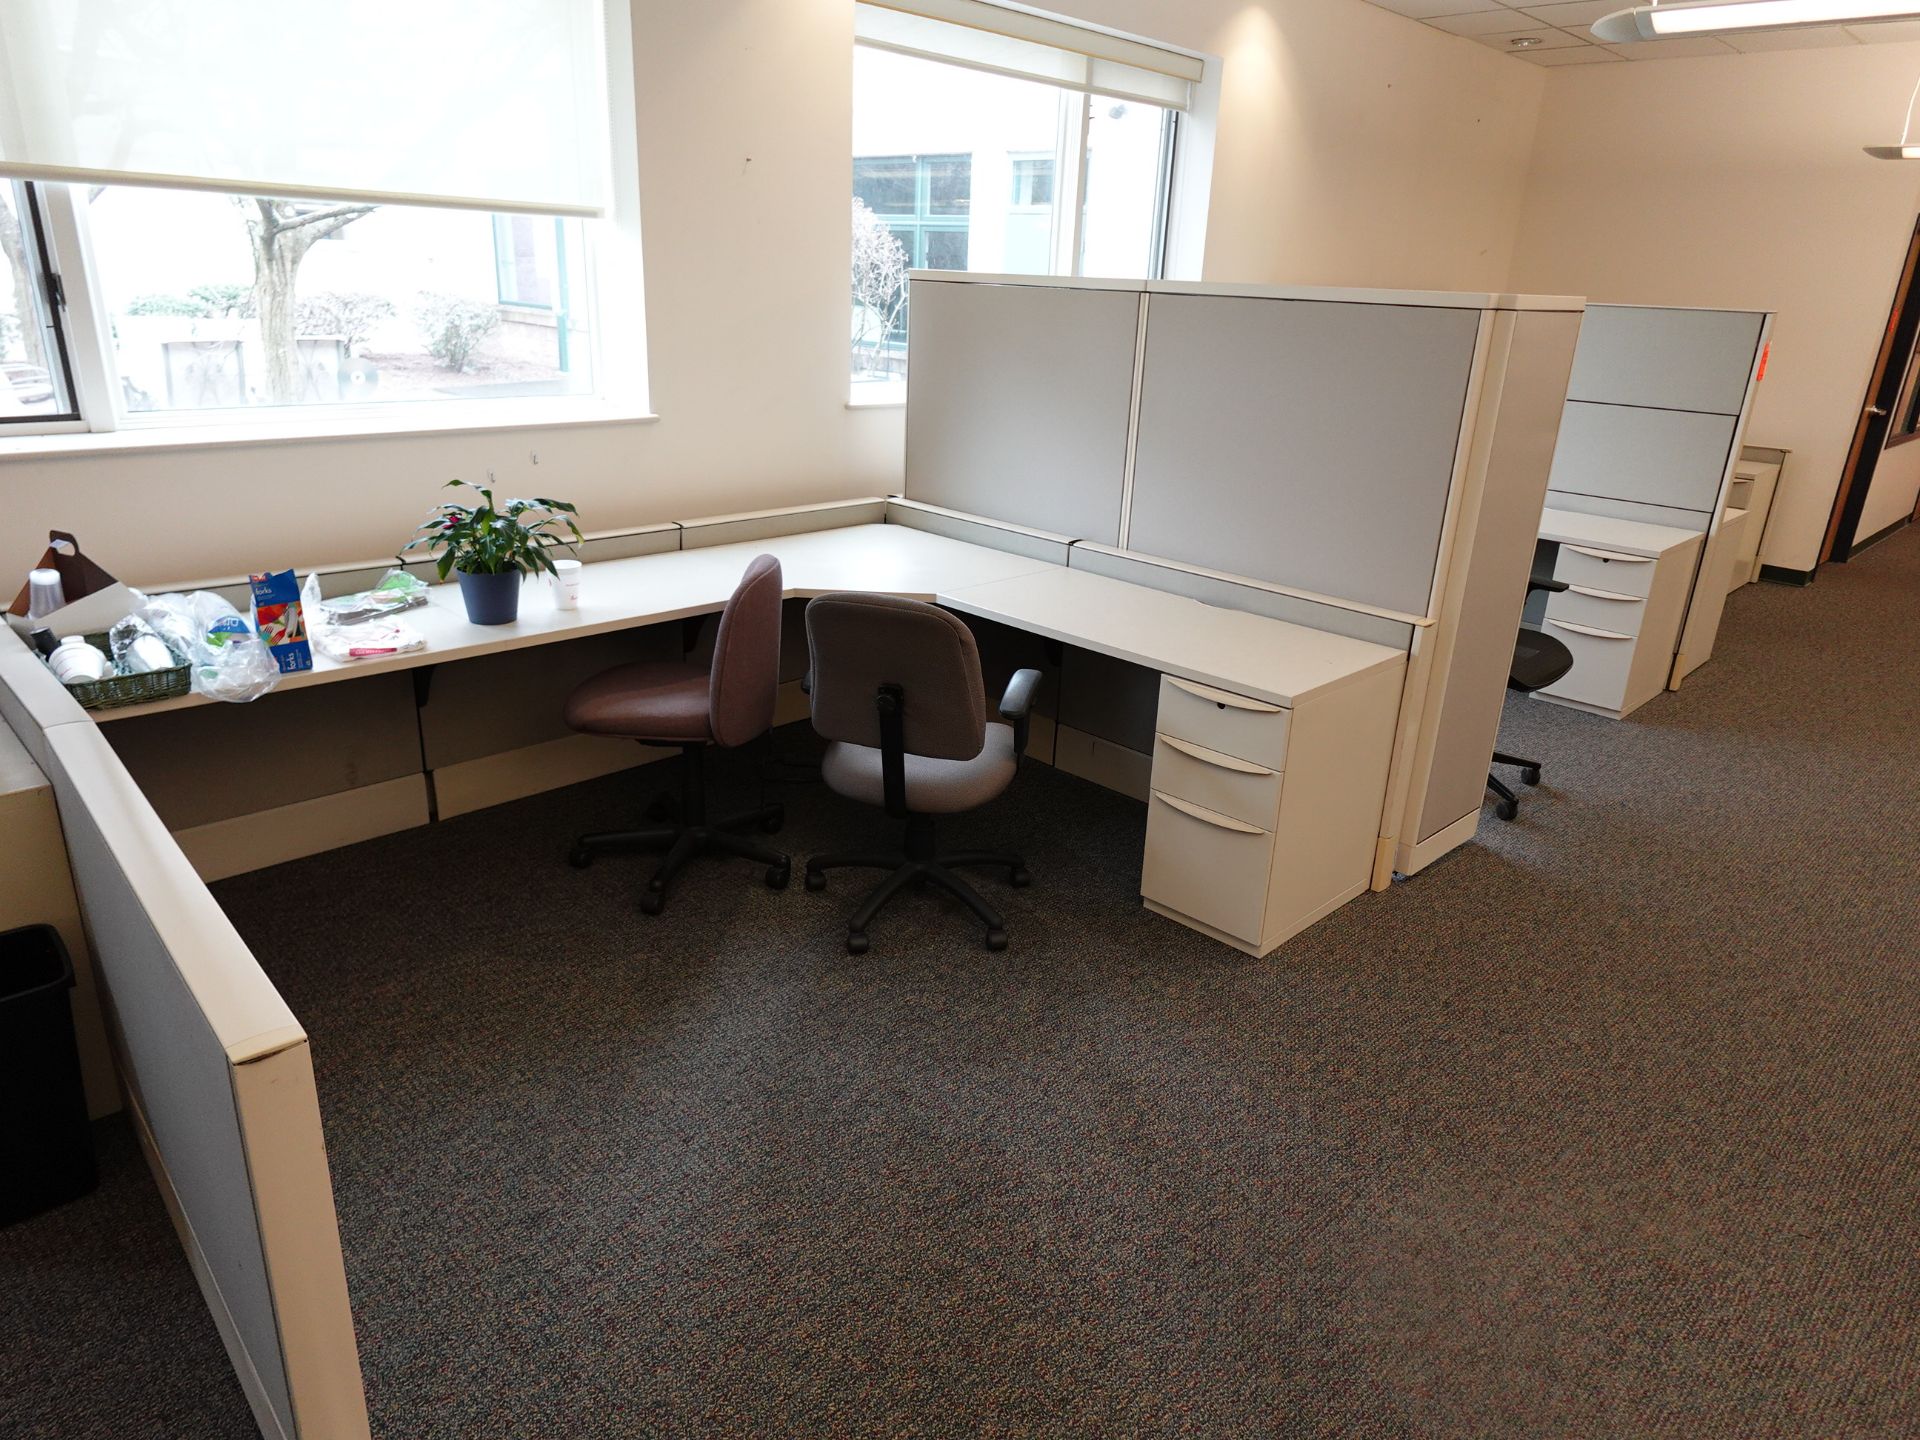 Haworth Office Cubicals - Image 3 of 3